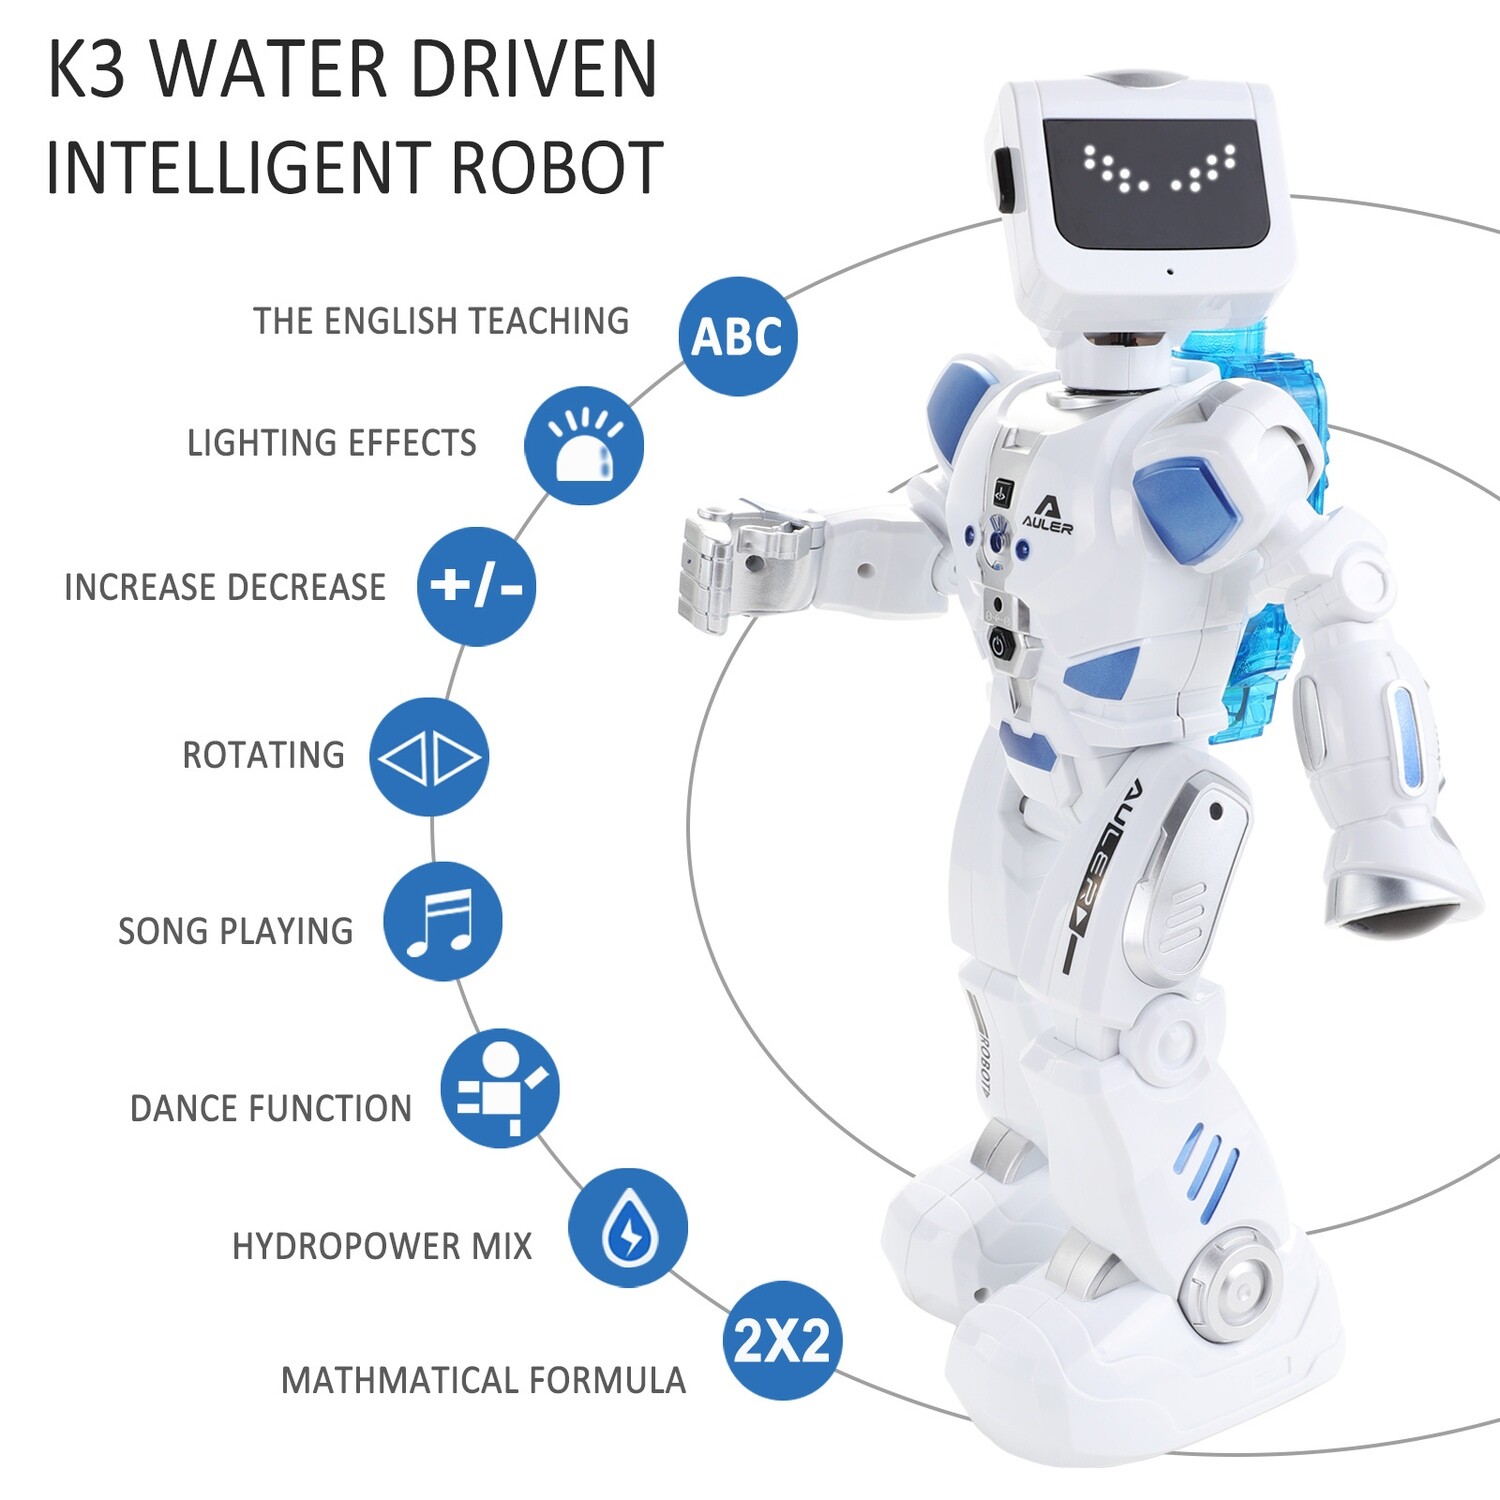 Intelligent dancing interactive robot for kids with FREE Shipping.